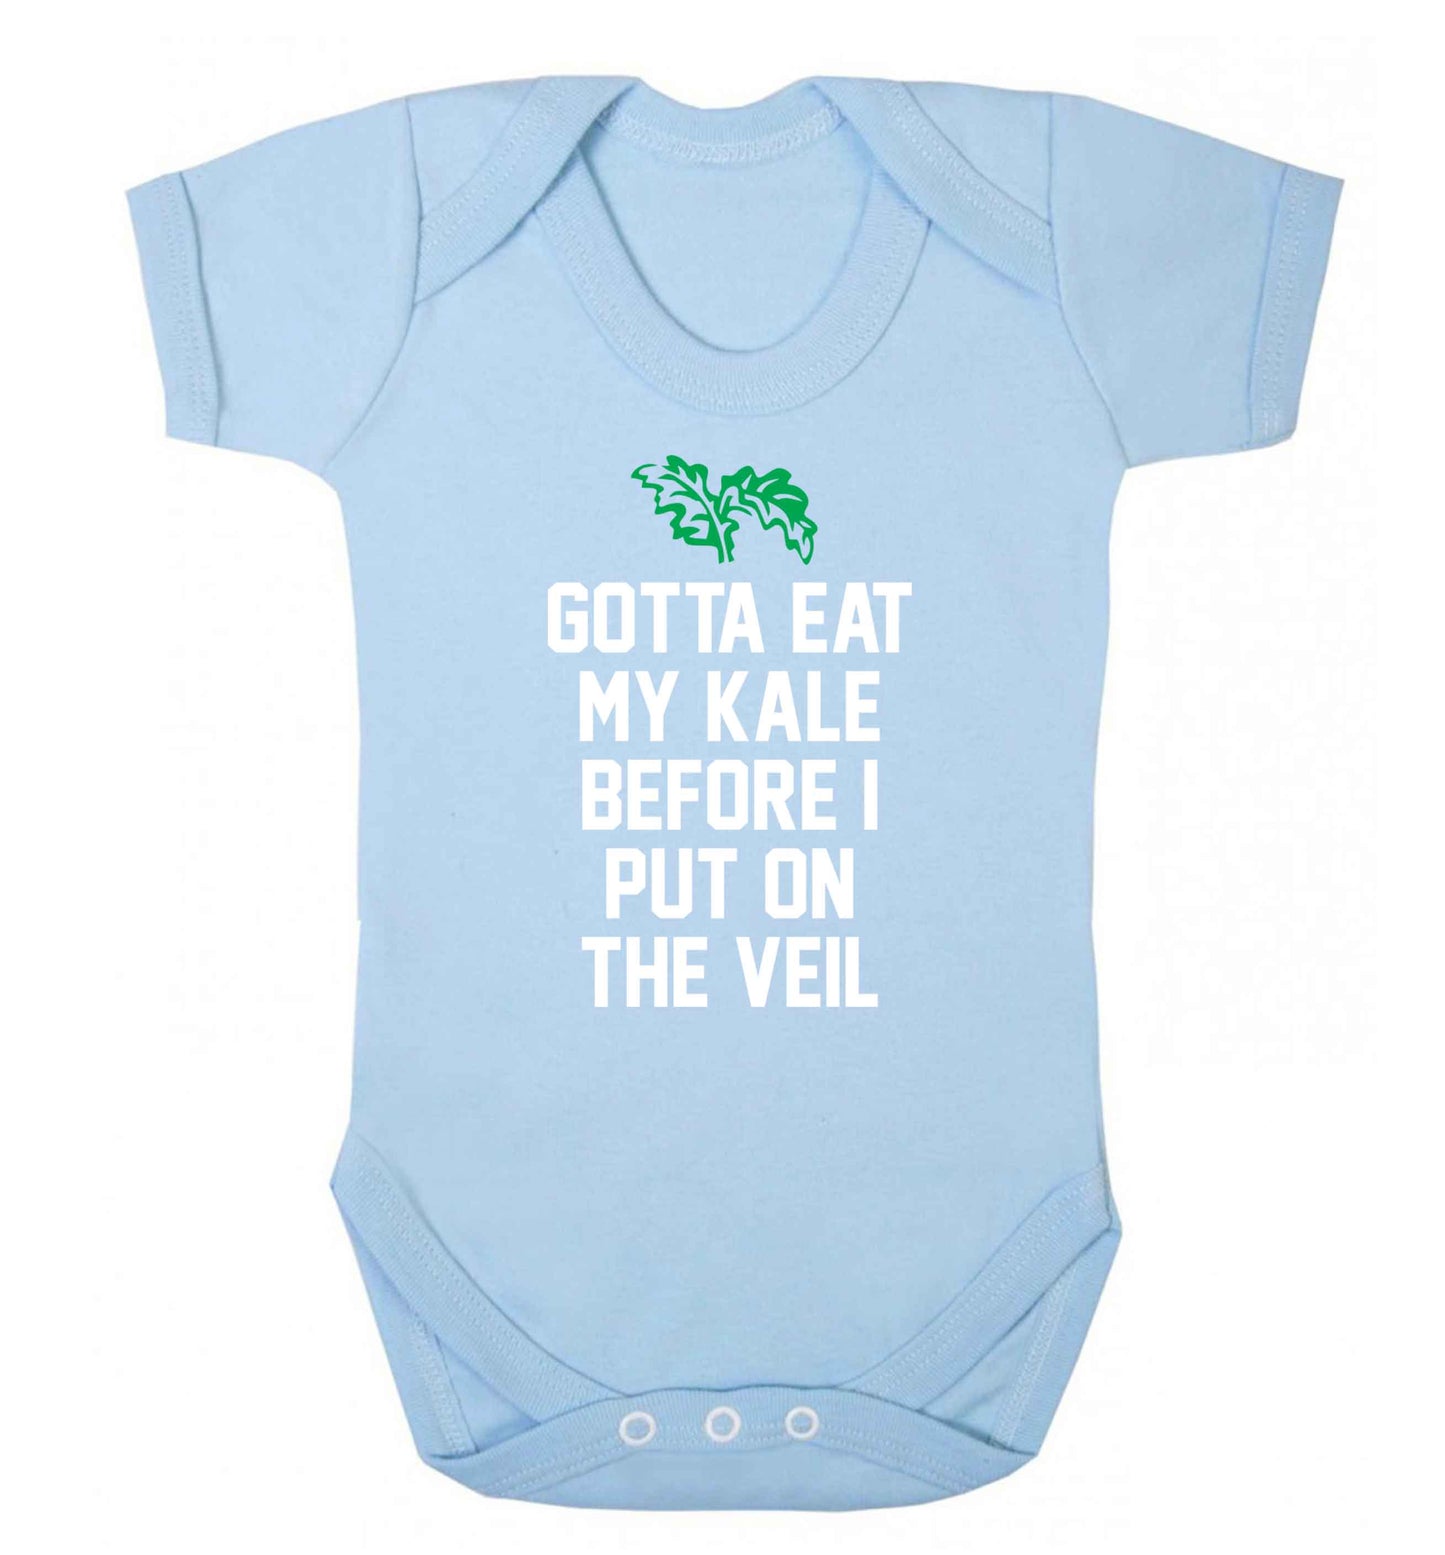 Gotta eat my kale before I put on the veil Baby Vest pale blue 18-24 months